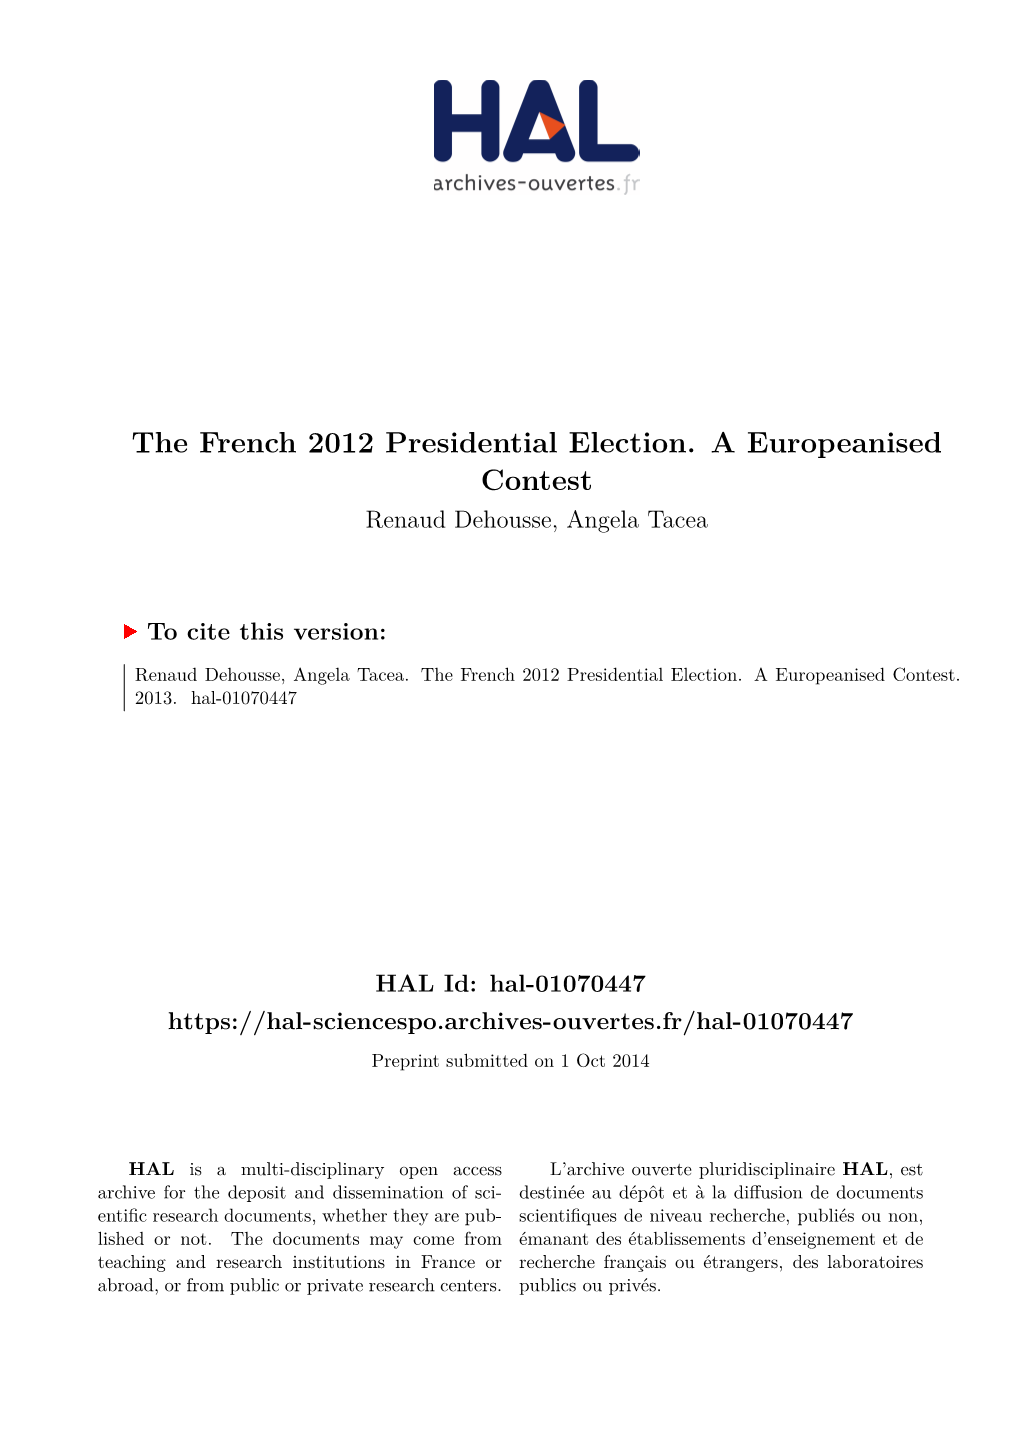 The French 2012 Presidential Election. a Europeanised Contest Renaud Dehousse, Angela Tacea